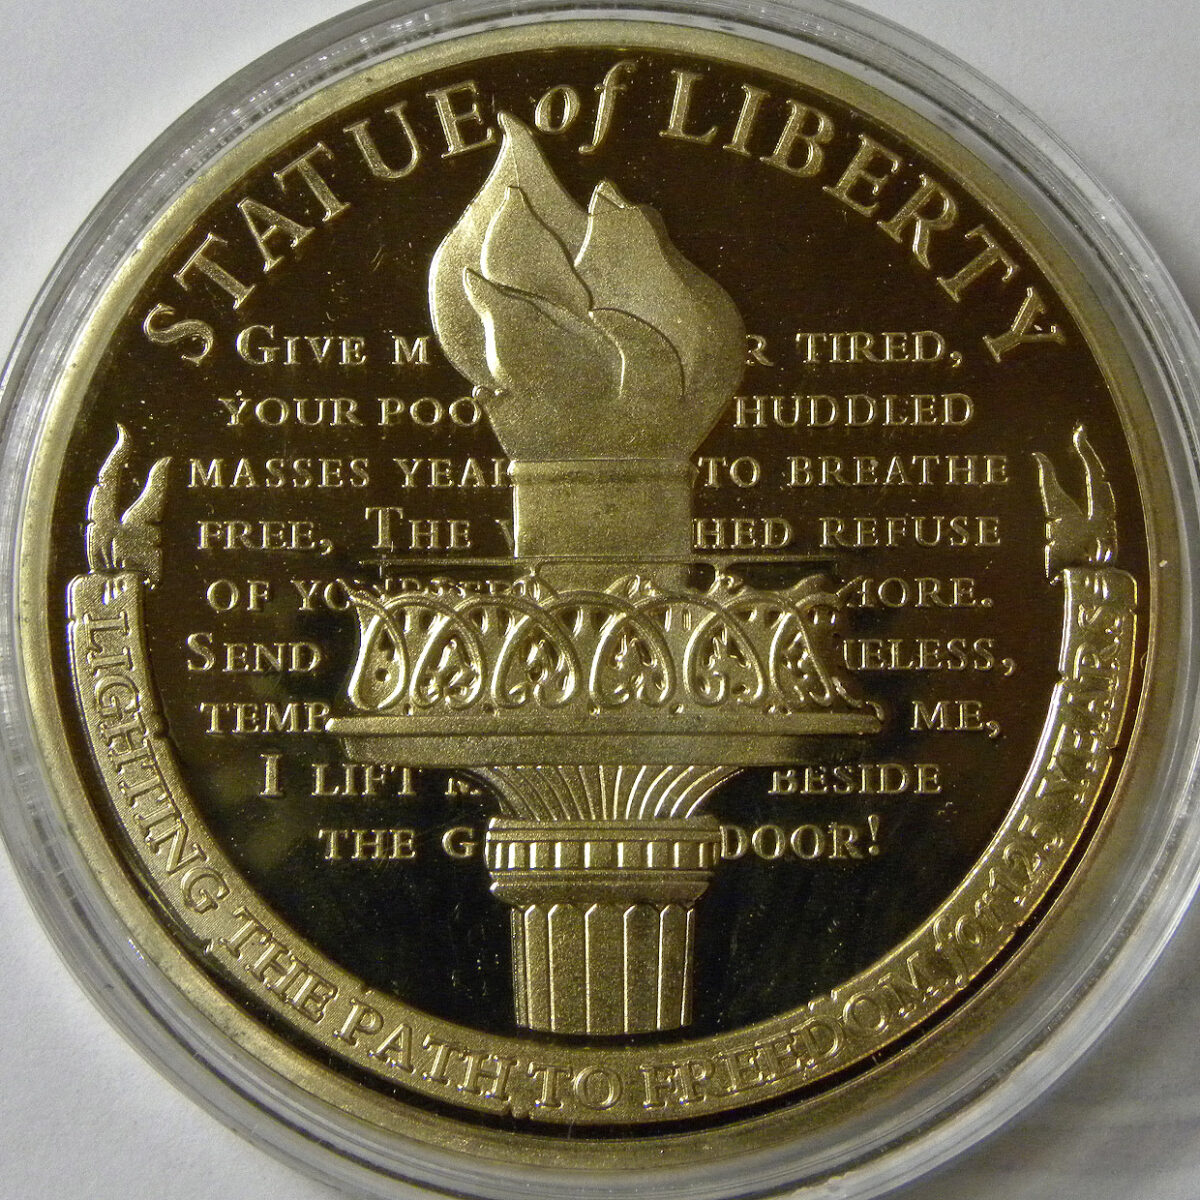 Statue of Liberty 125th Anniversary medal (reverse alt photo)